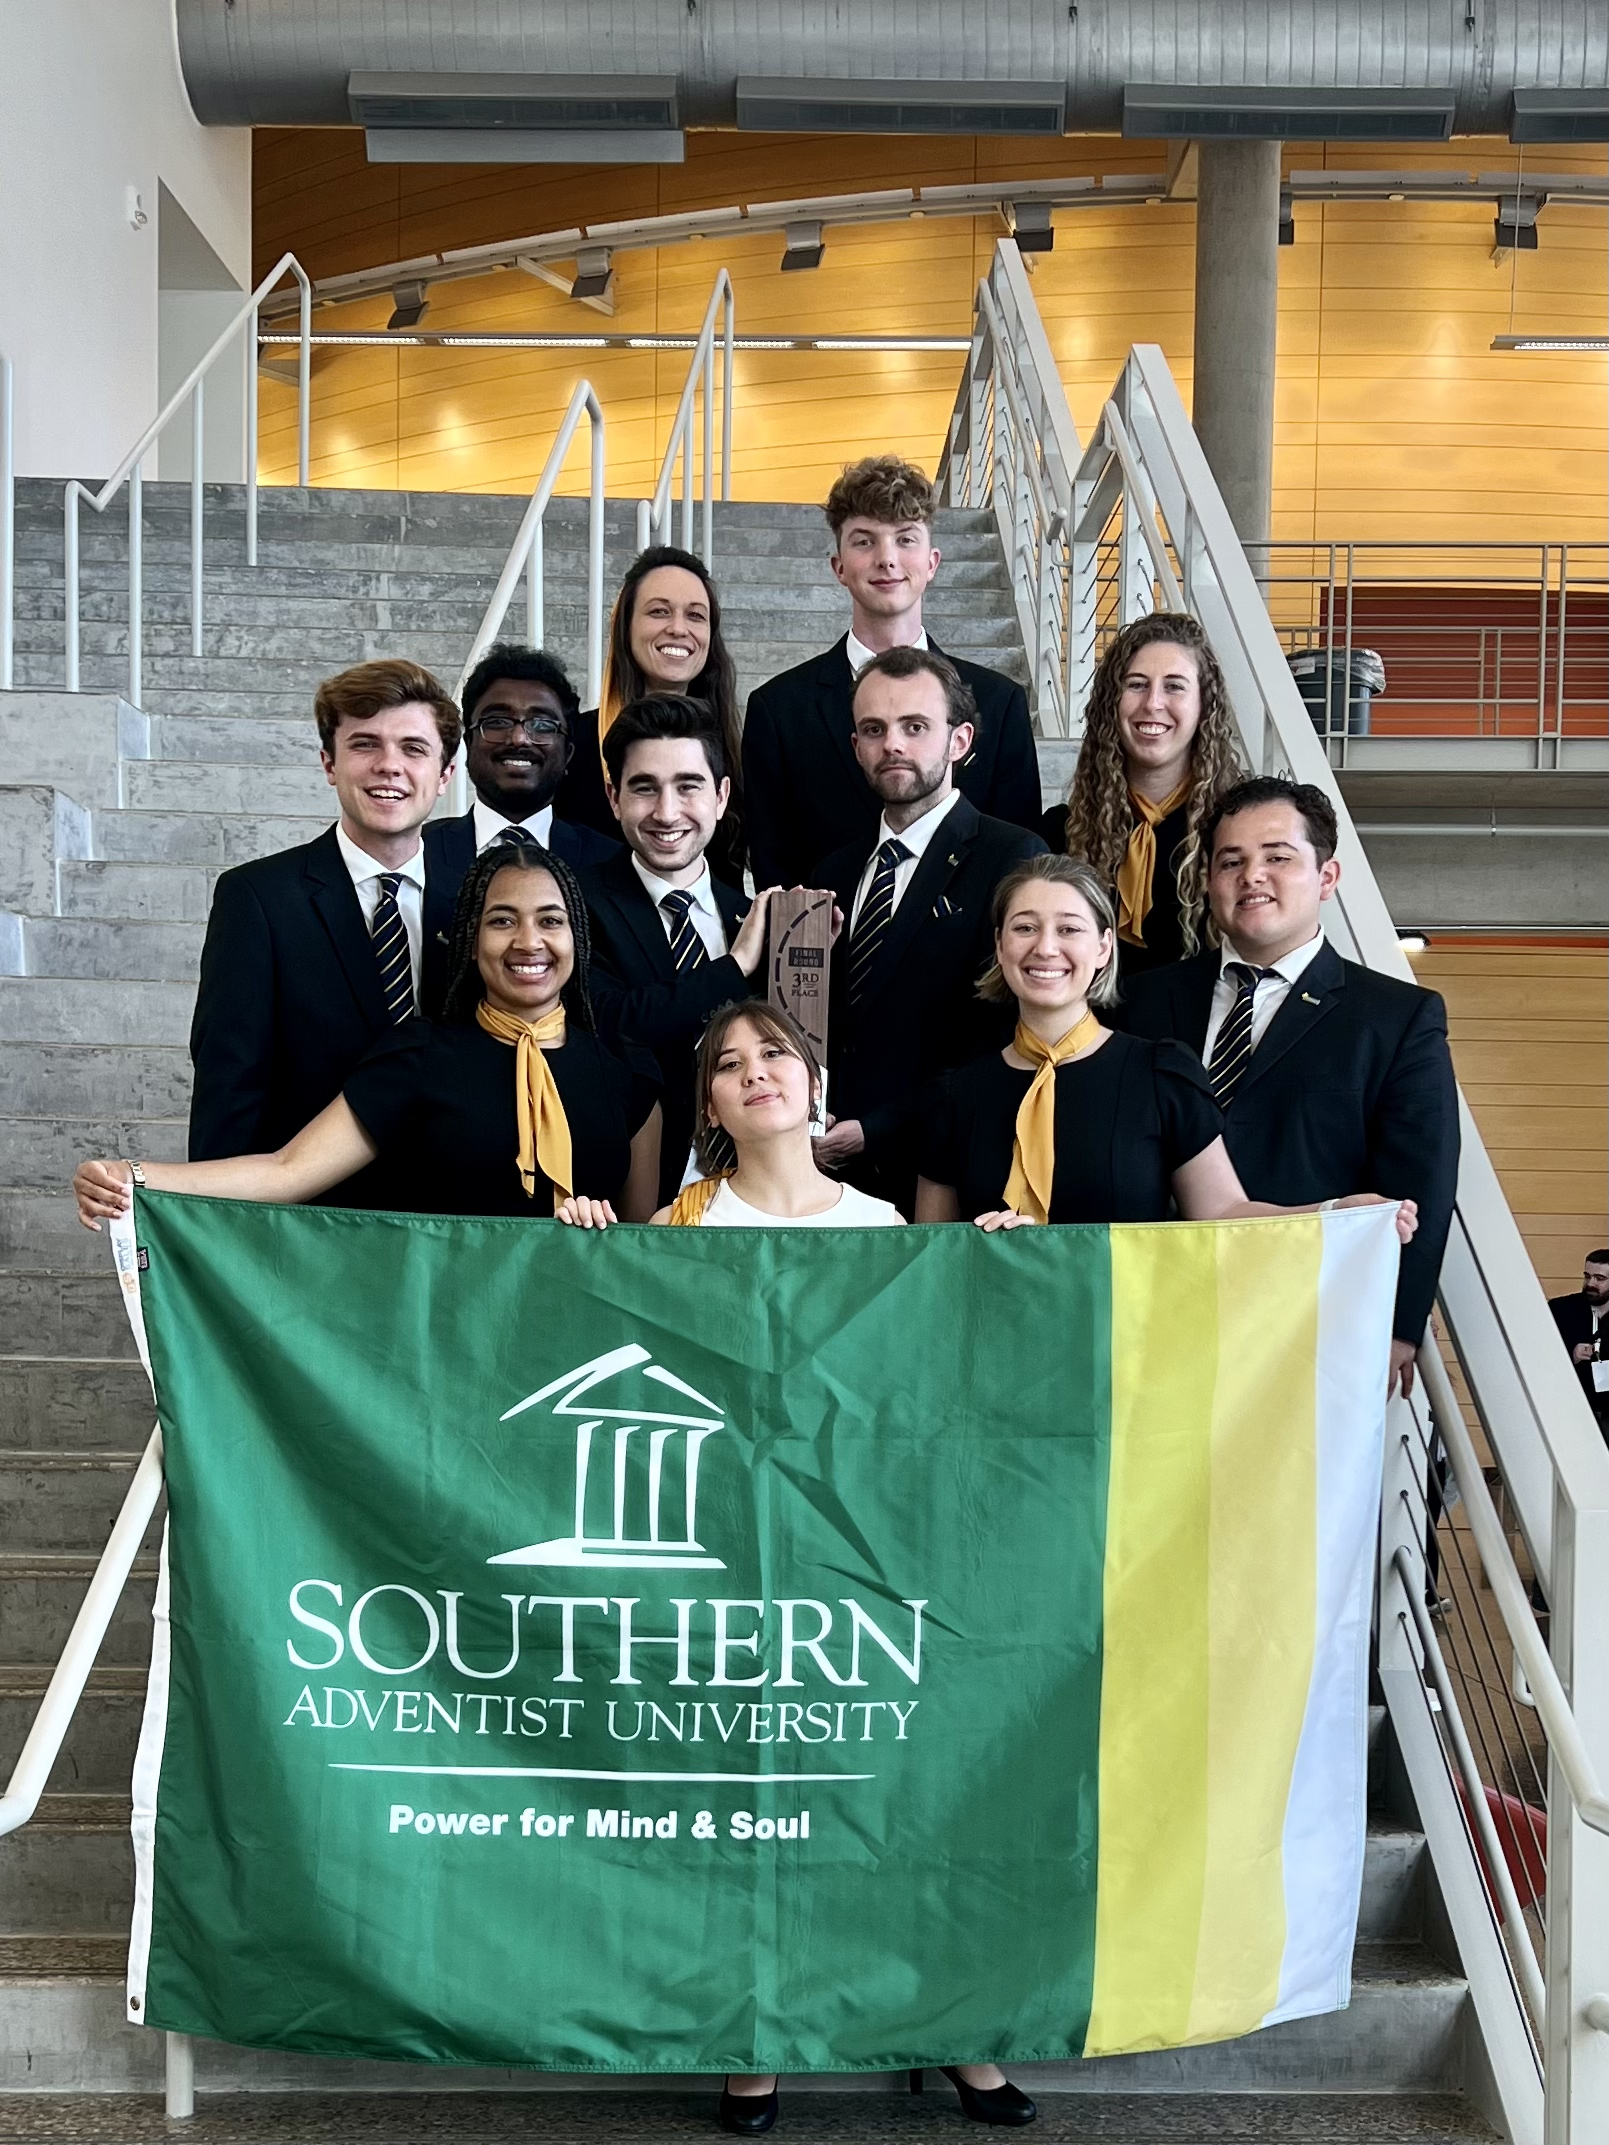 Southern’s Enactus team of students received national recognition for their work helping those in need.